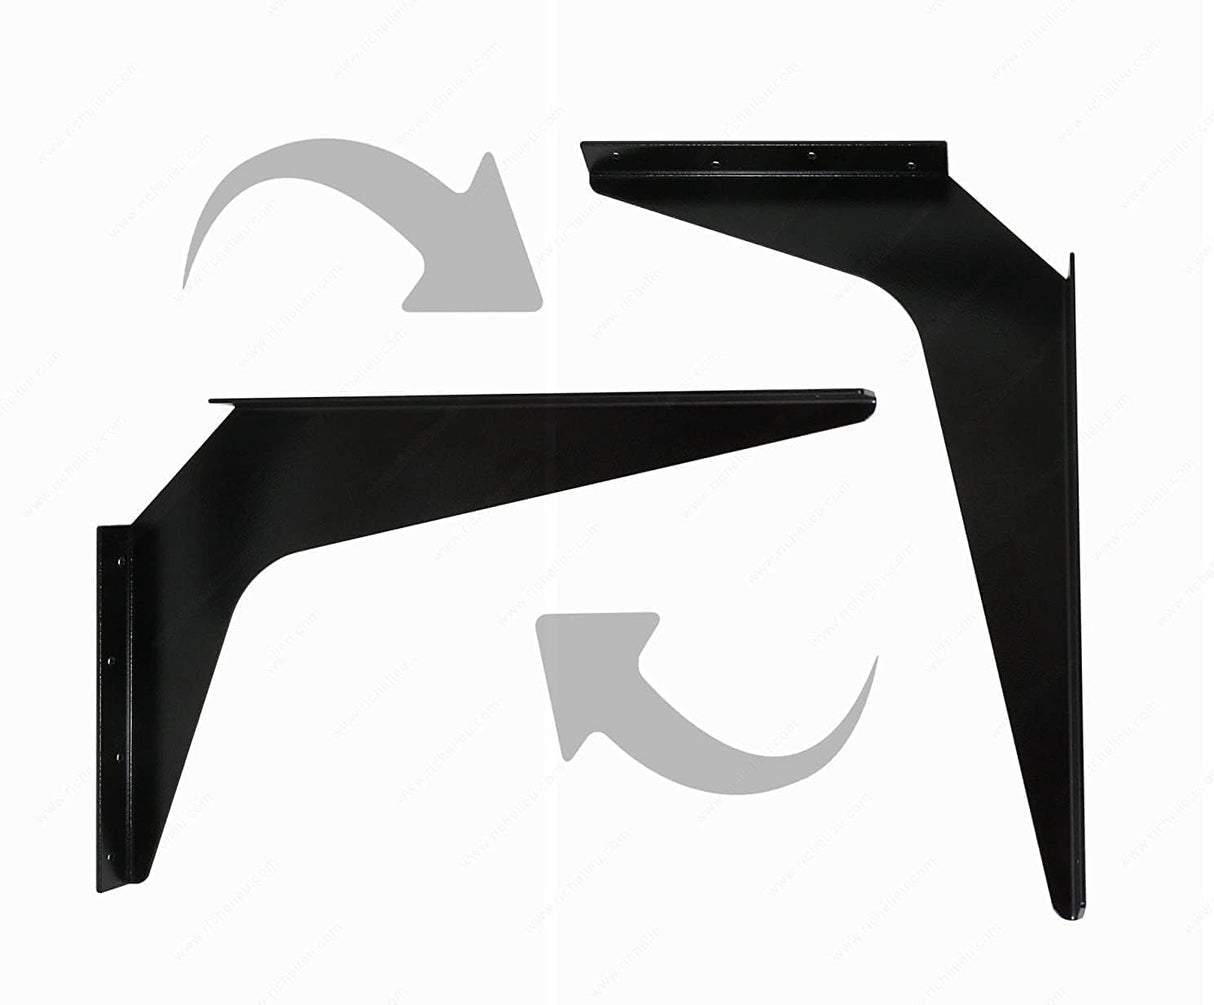 Kolossus RHC9910 One Pair Heavy-Duty 1/8" Steel Construction Textured Powder-Coat Reversible Brackets (Left and Right) with 45 Degree Notch